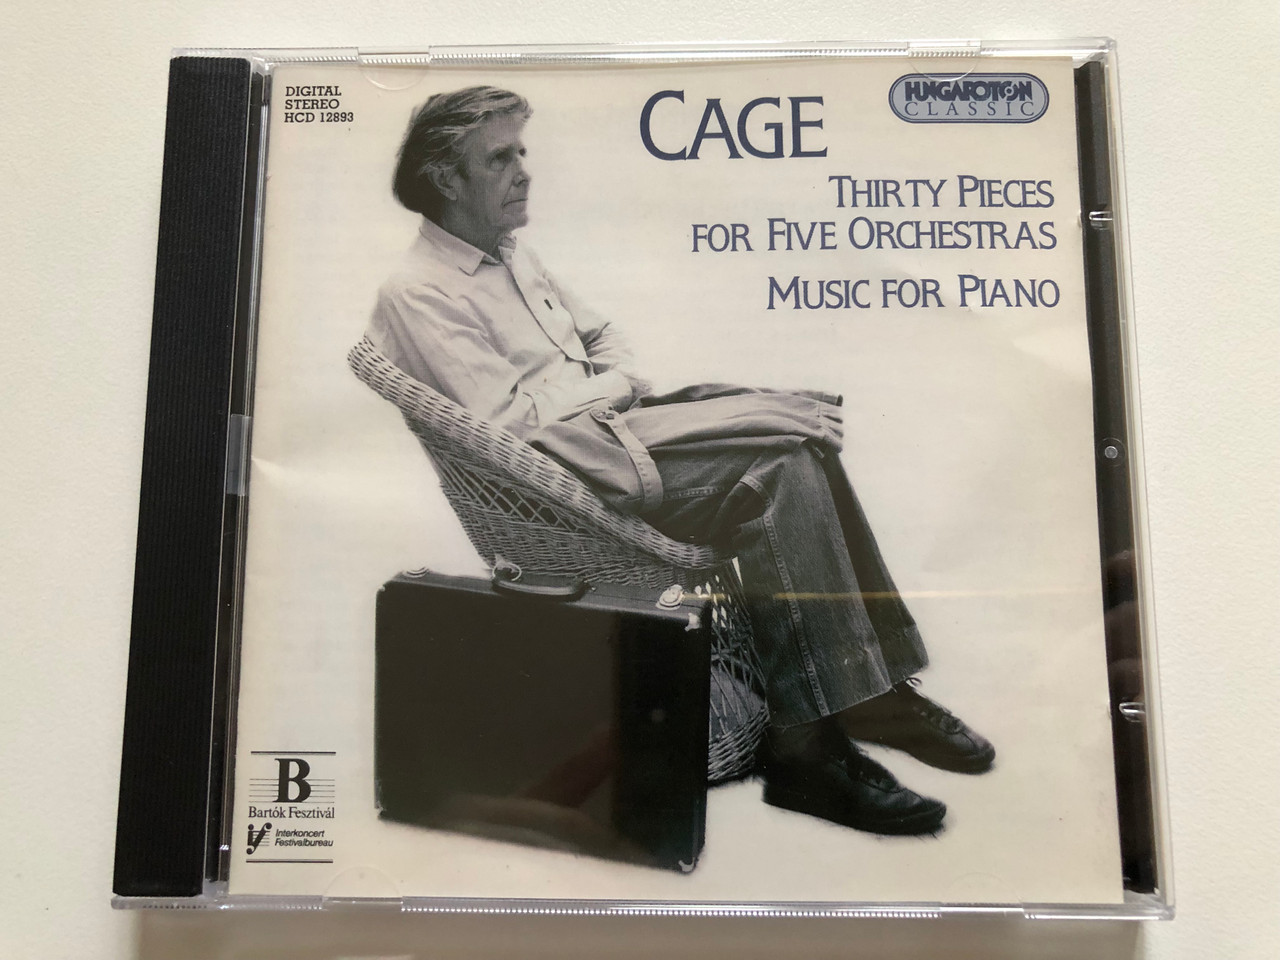 https://cdn10.bigcommerce.com/s-62bdpkt7pb/products/0/images/310790/Cage_Thirty_Pieces_For_Five_Orchestras_Music_For_Piano_Hungaroton_Classic_Audio_CD_2001_Stereo_HCD_12893_1__24010.1699454419.1280.1280.JPG?c=2